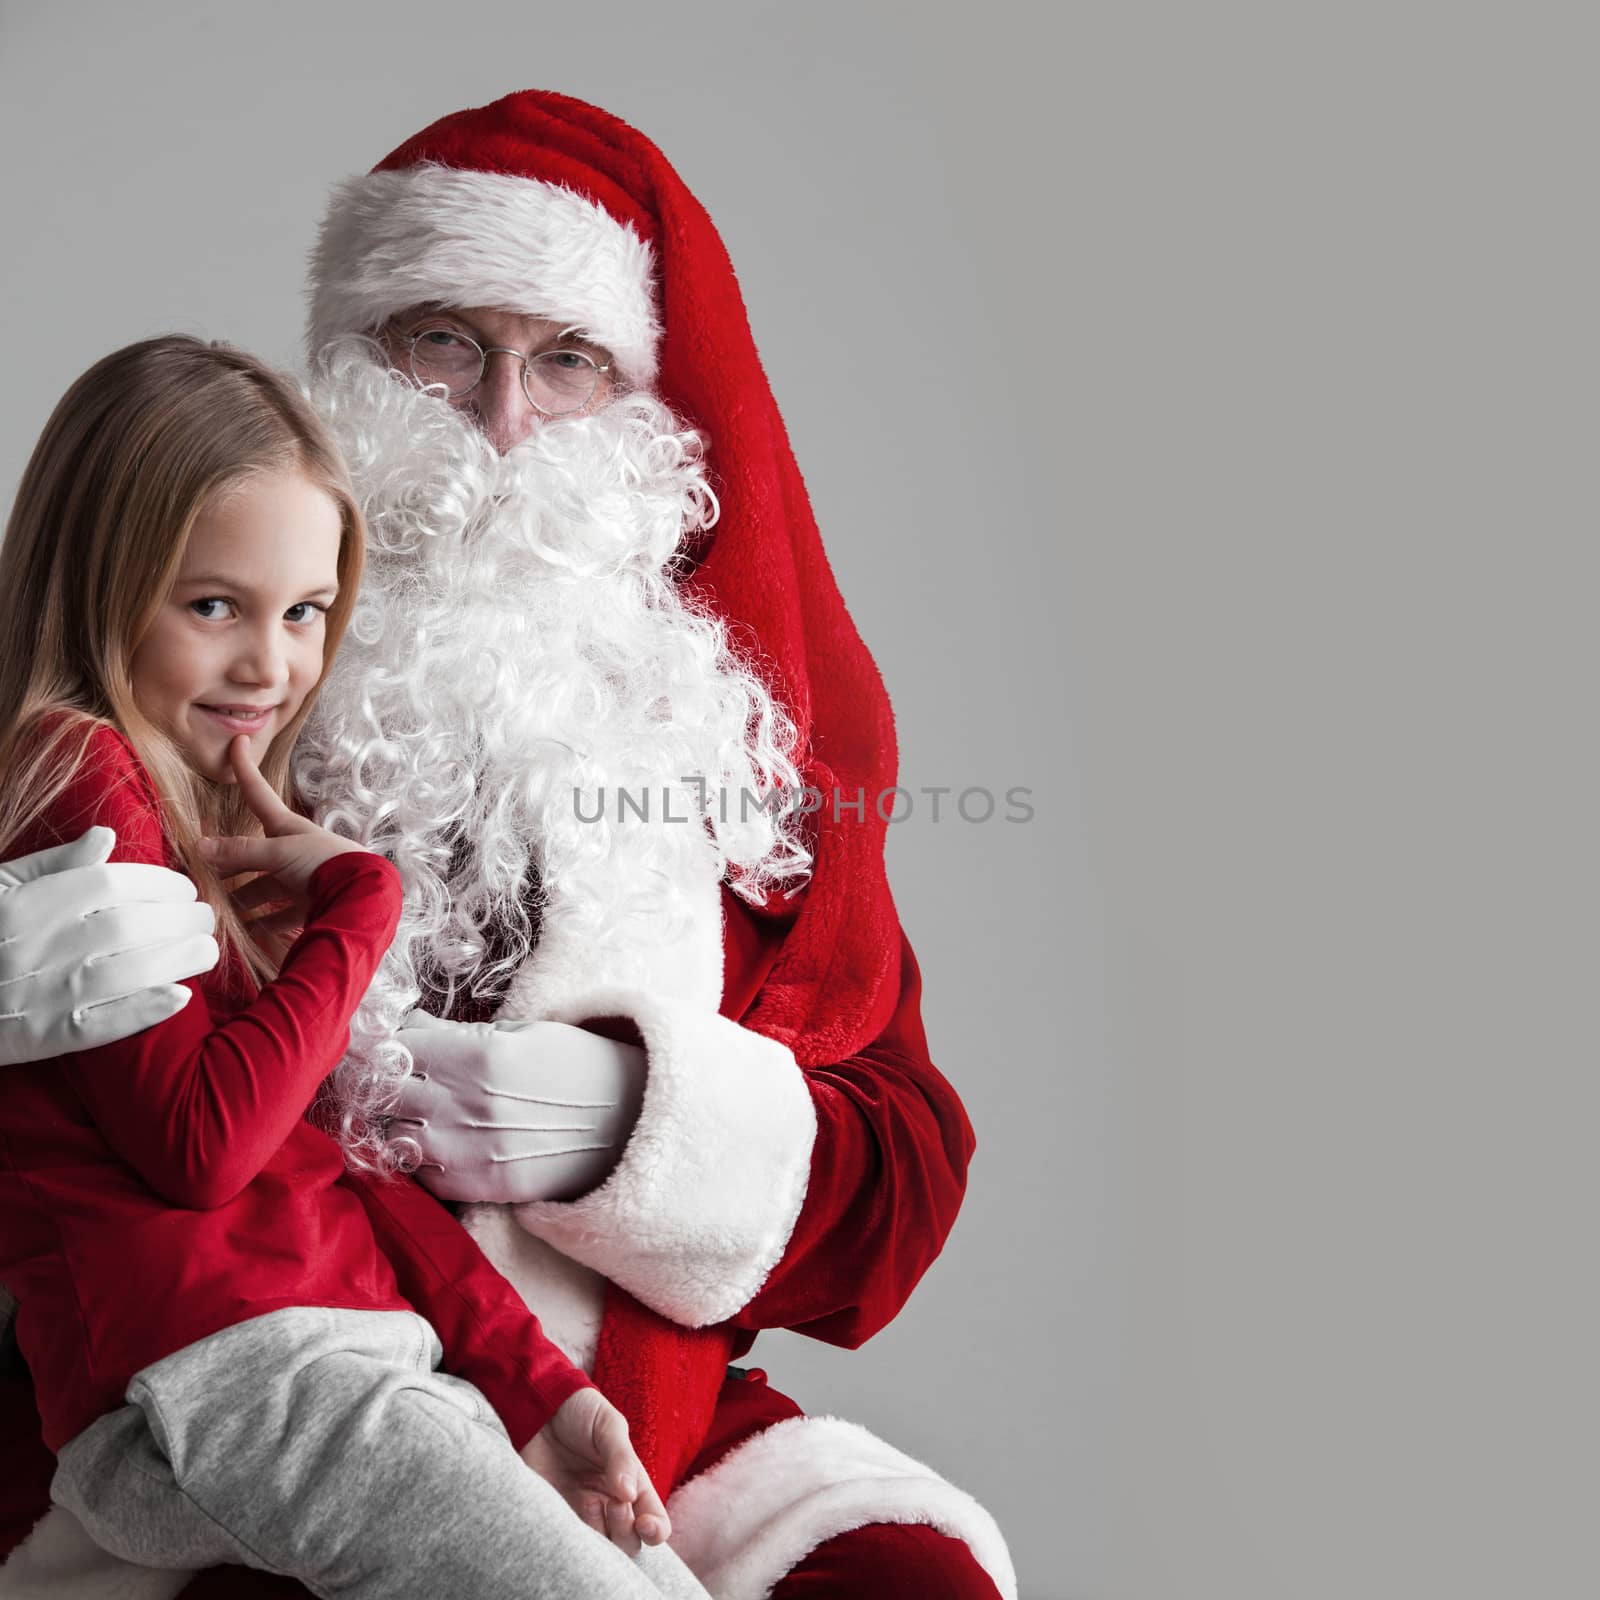 Smiling little girl with Santa Claus, Christmas concept